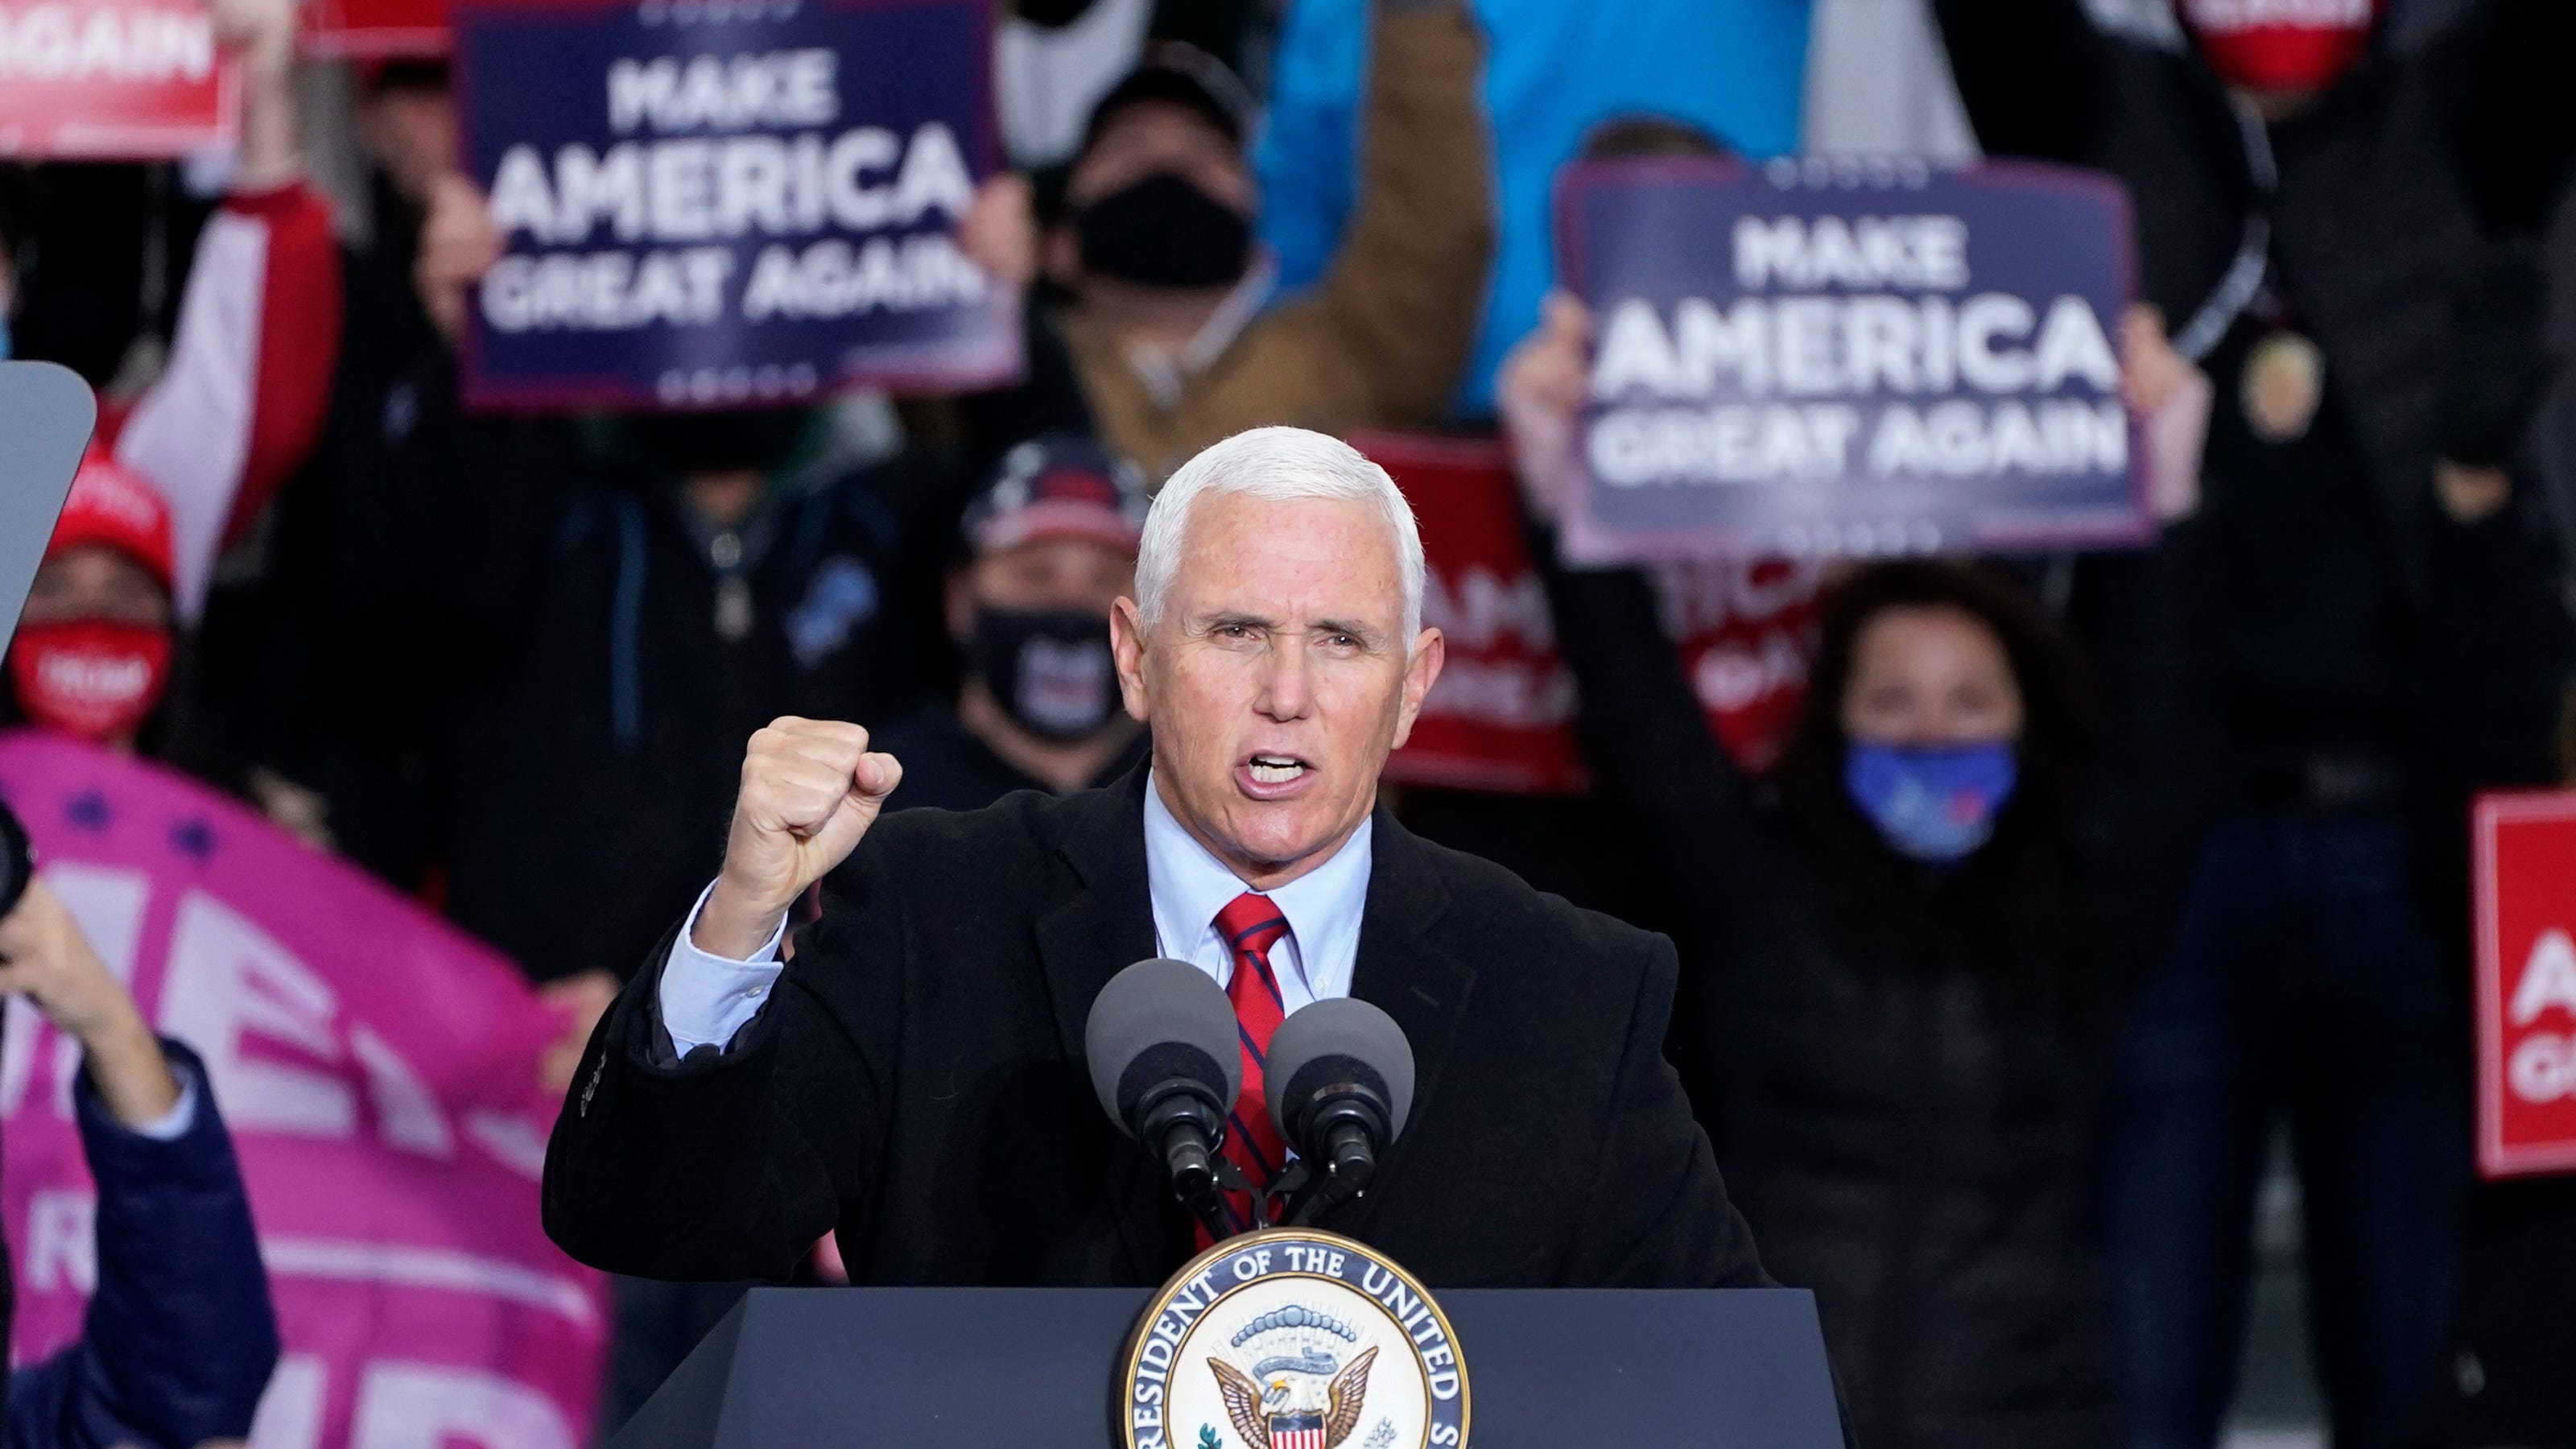 Pence campaigns for Trump in Flint, gets key Democrat's vote - The Detroit News